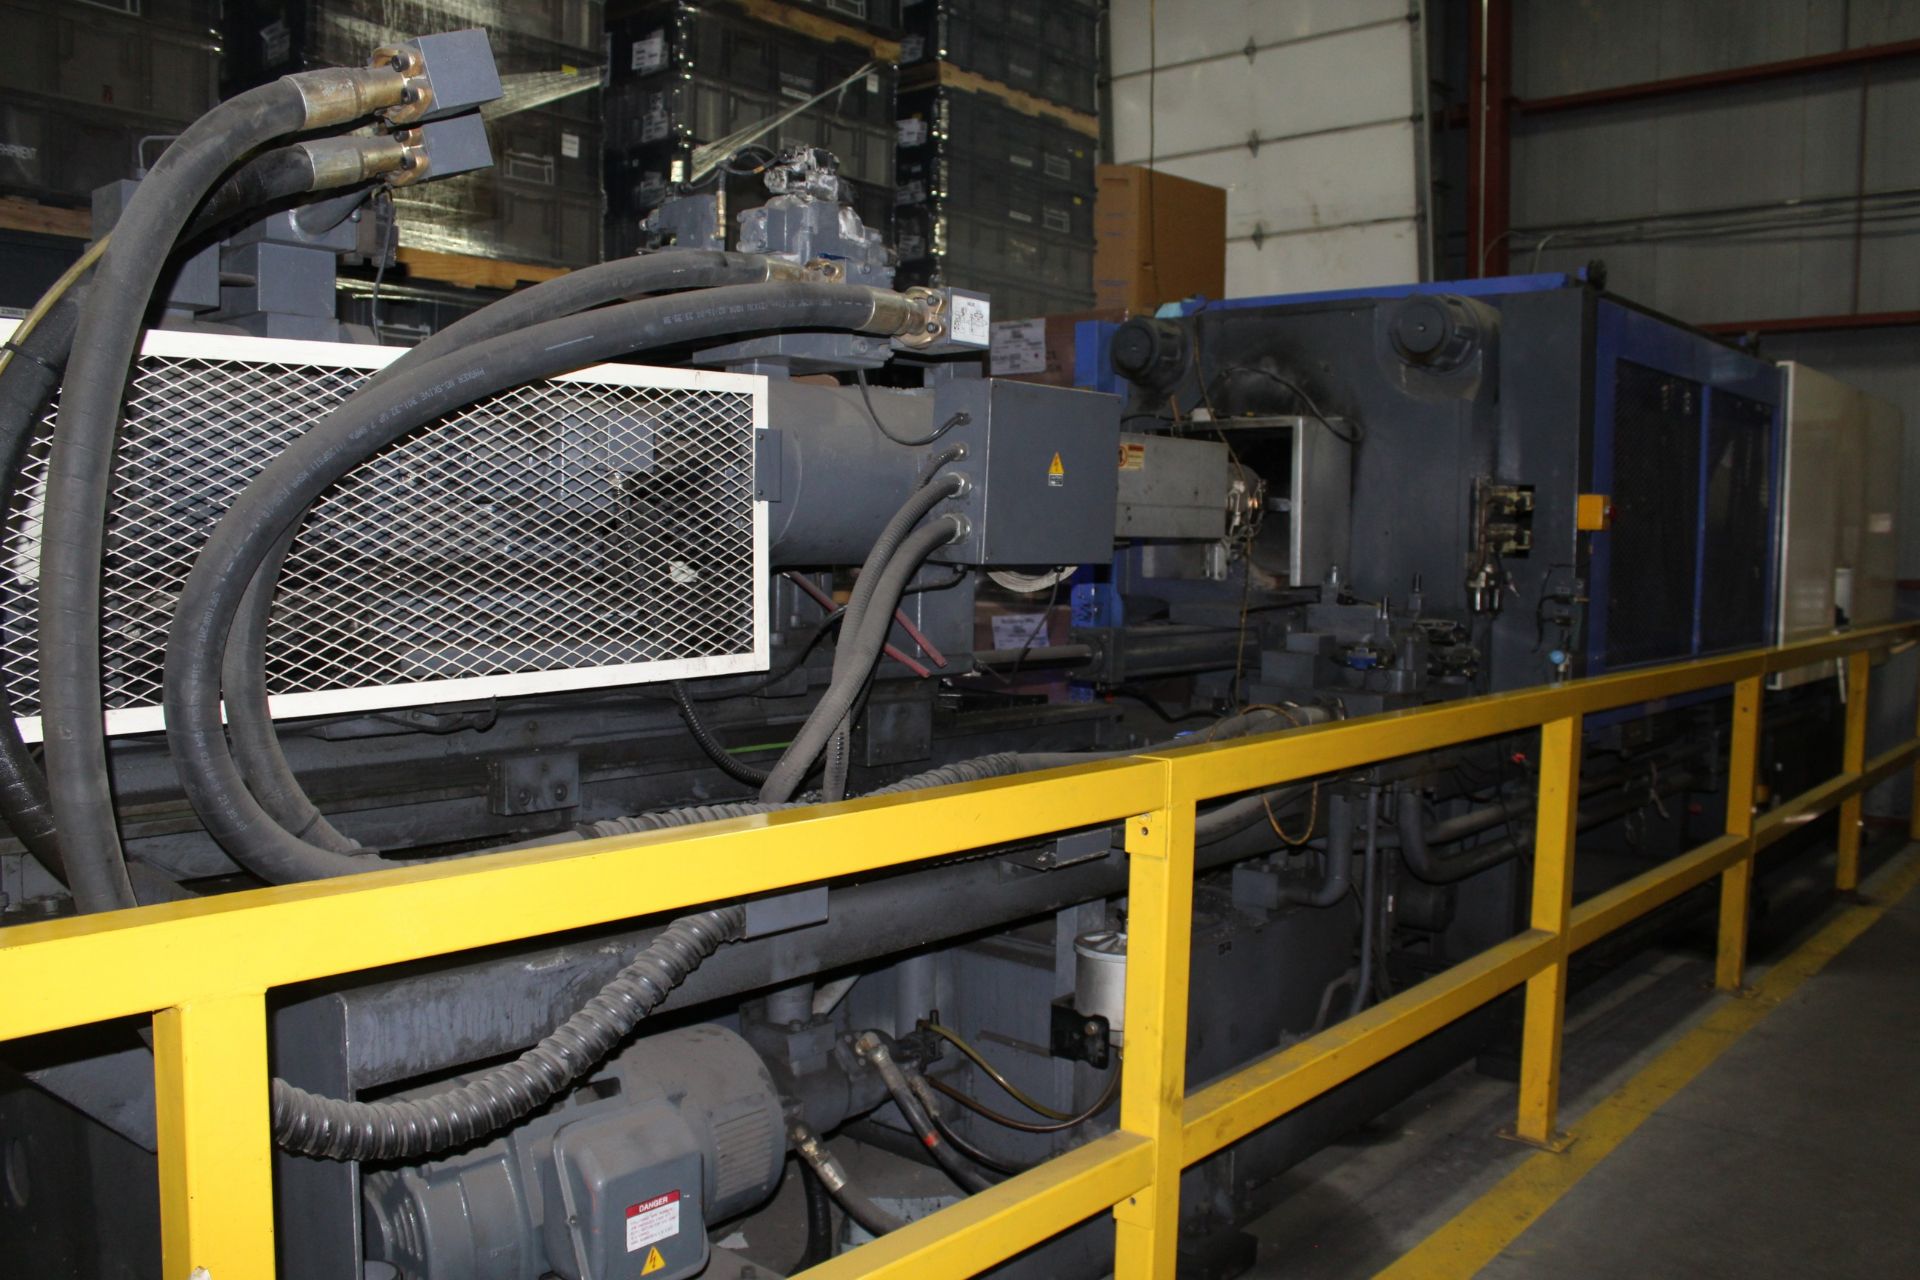 LG GOLD STAR 500H INJECTION MOLDER, 500-TON CAP. - Image 38 of 38